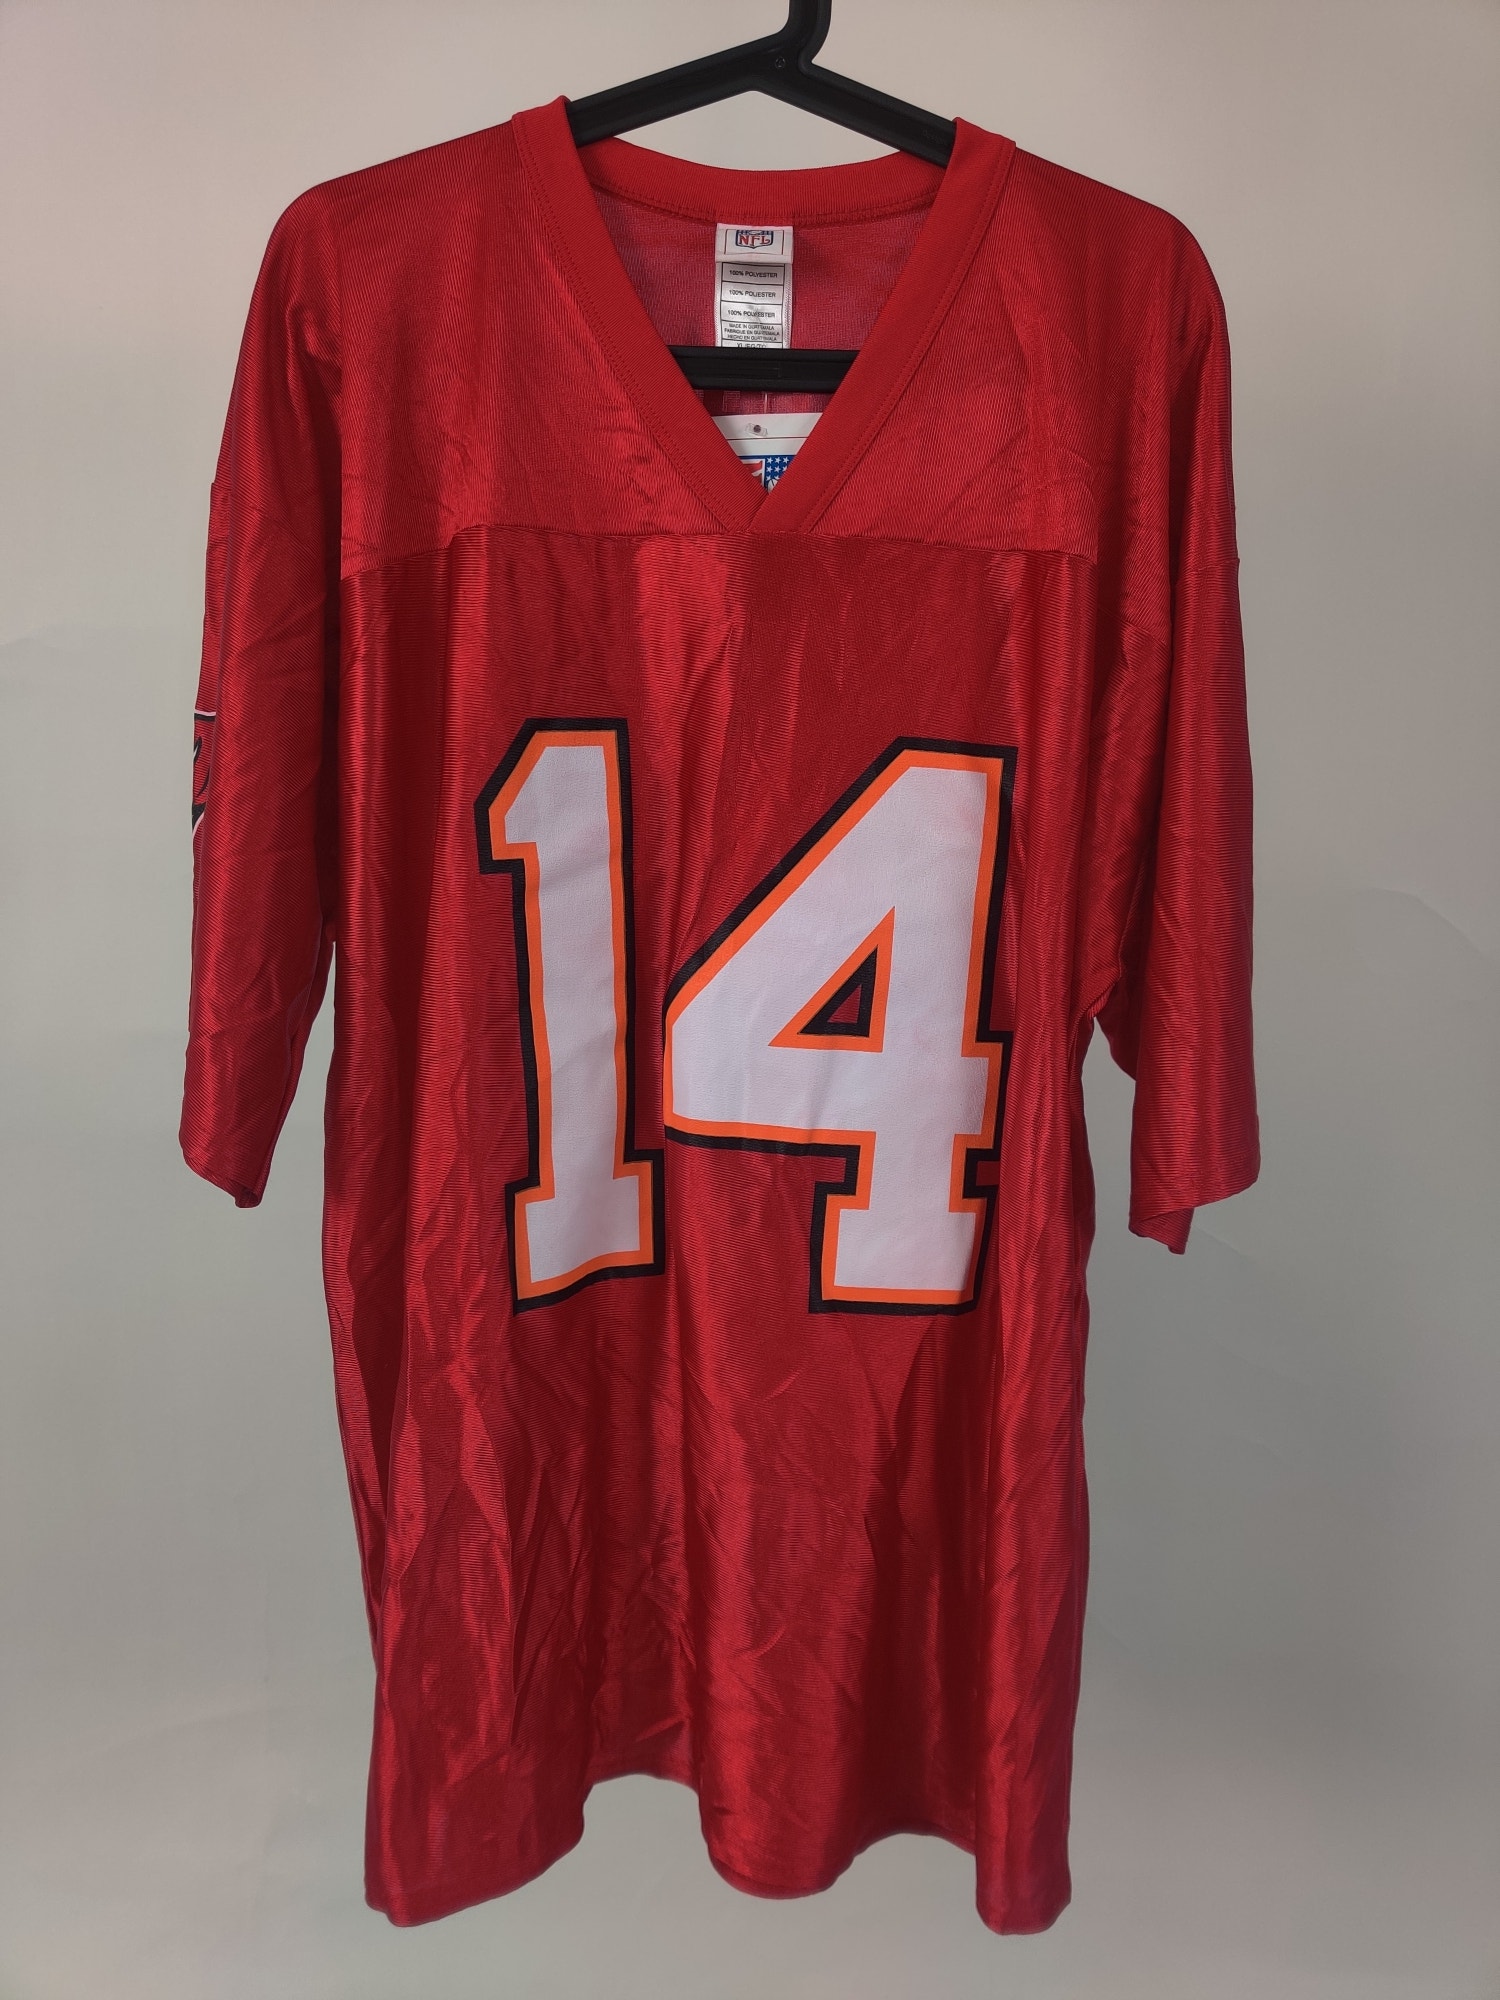 (V)NEW Tampa Bay Buccaneers B. Johnson #14 NFL Jersey Men’s XL - Picture 2 of 9